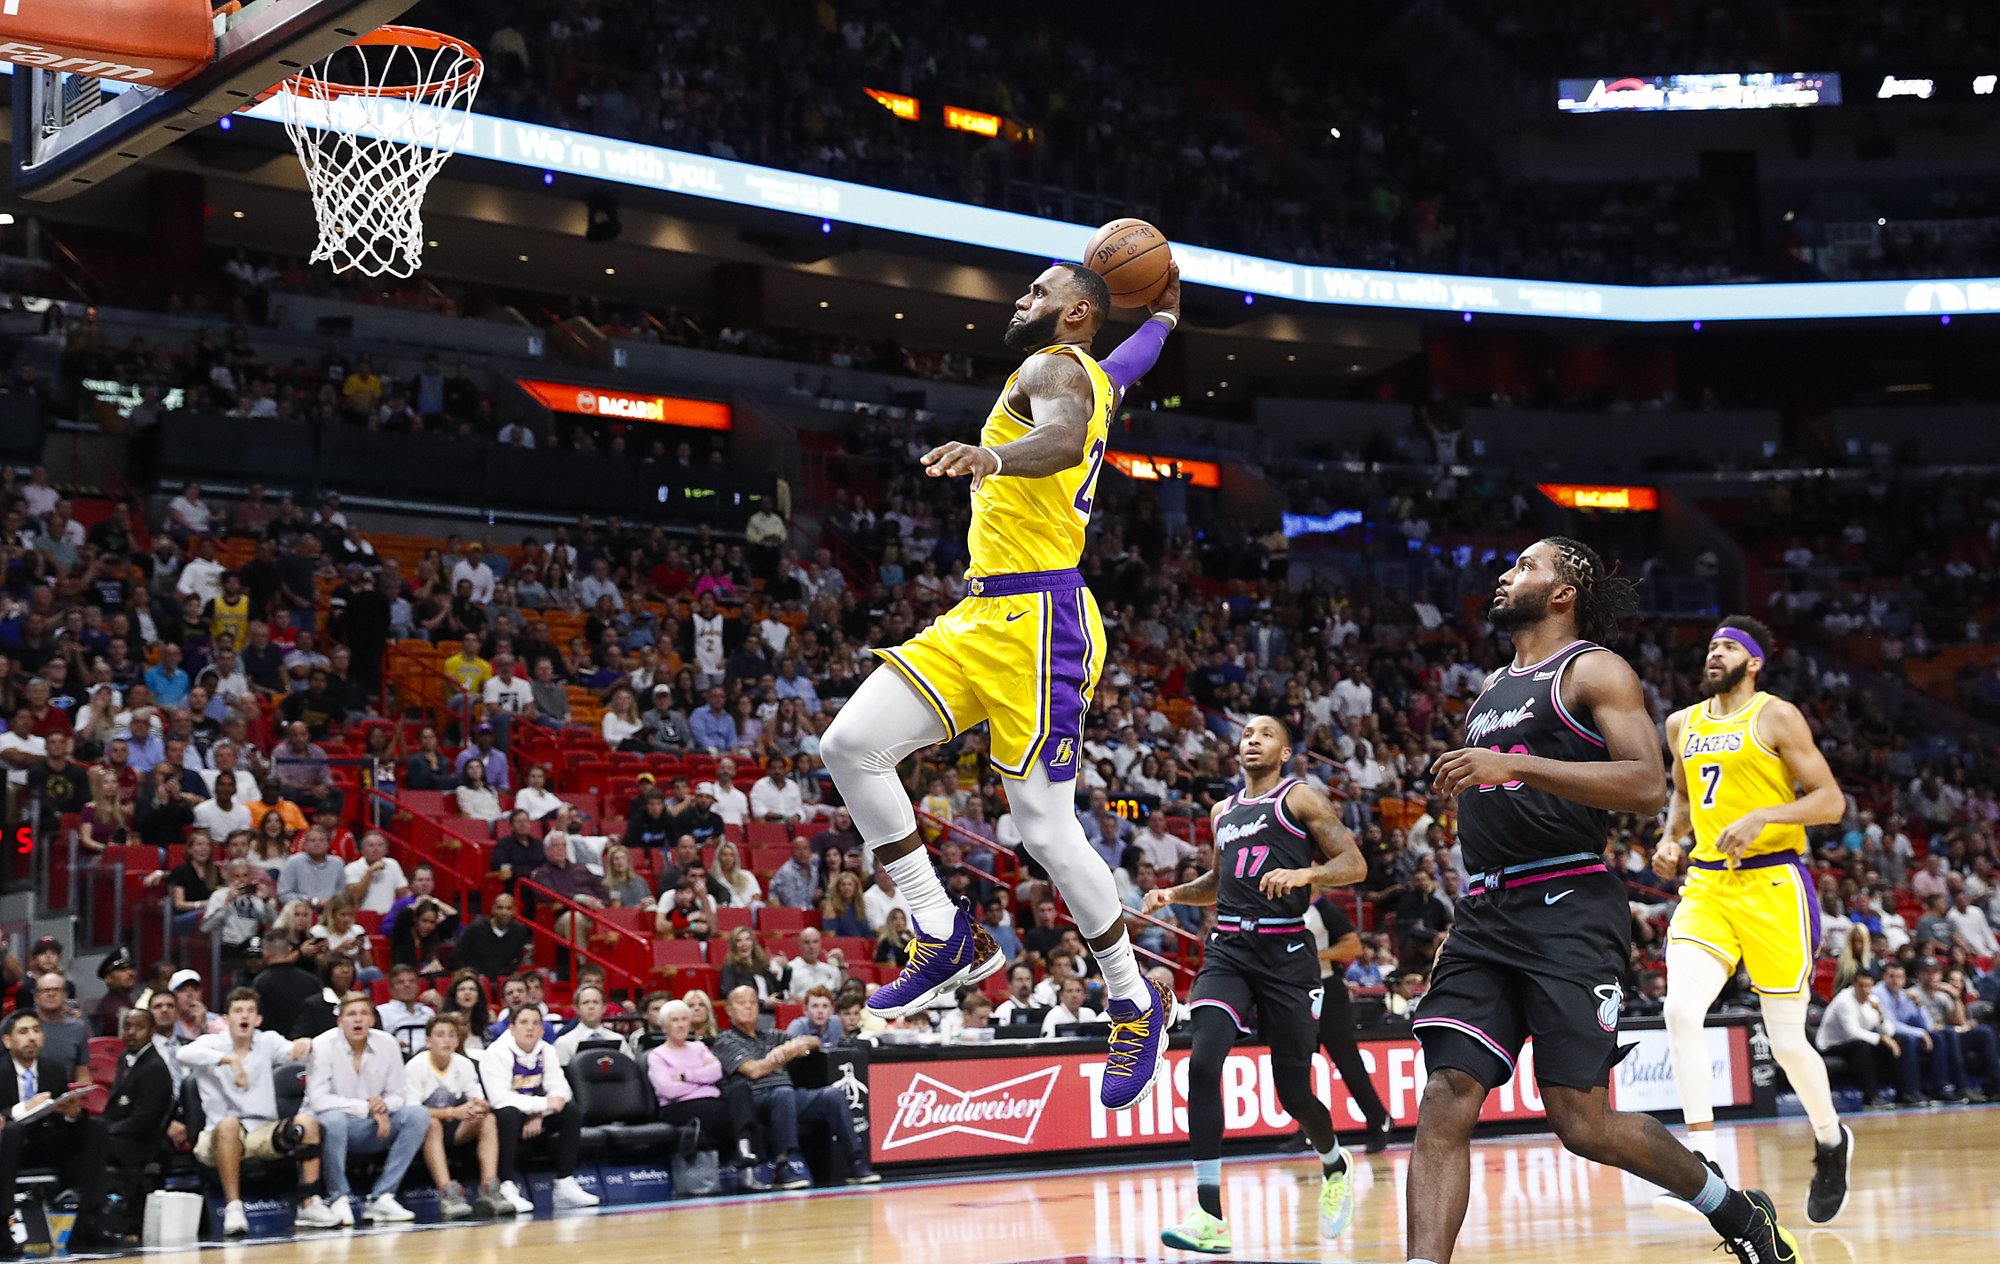 James scores 51 points, Lakers roll past Heat | Inquirer ...